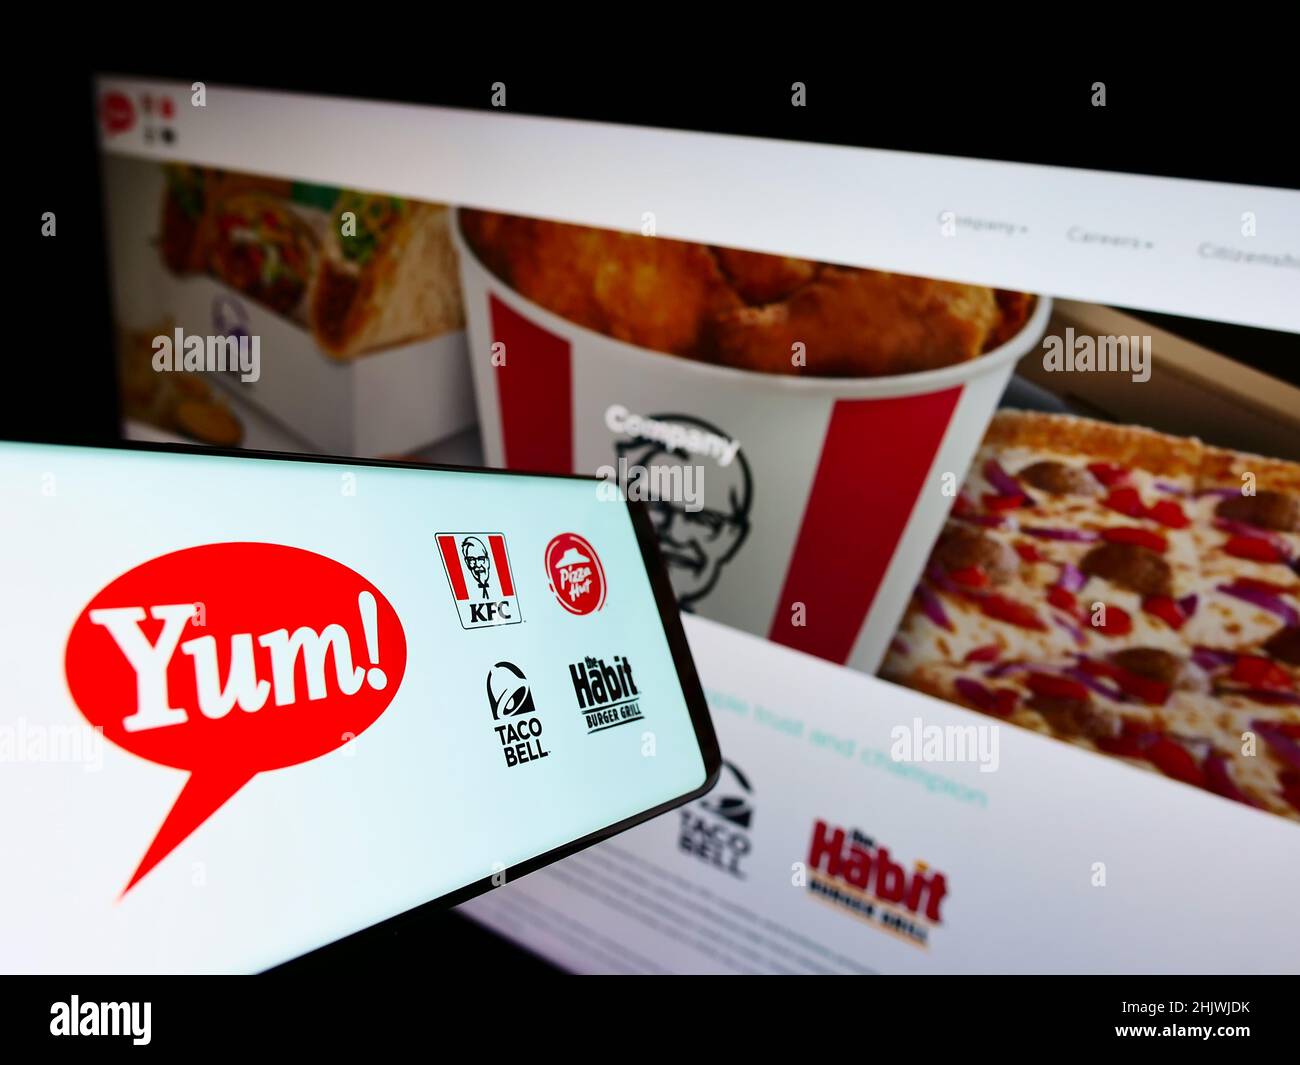 Smartphone with logo of American fast food company Yum! Brands Inc. on screen in front of website. Focus on center-right of phone display. Stock Photo